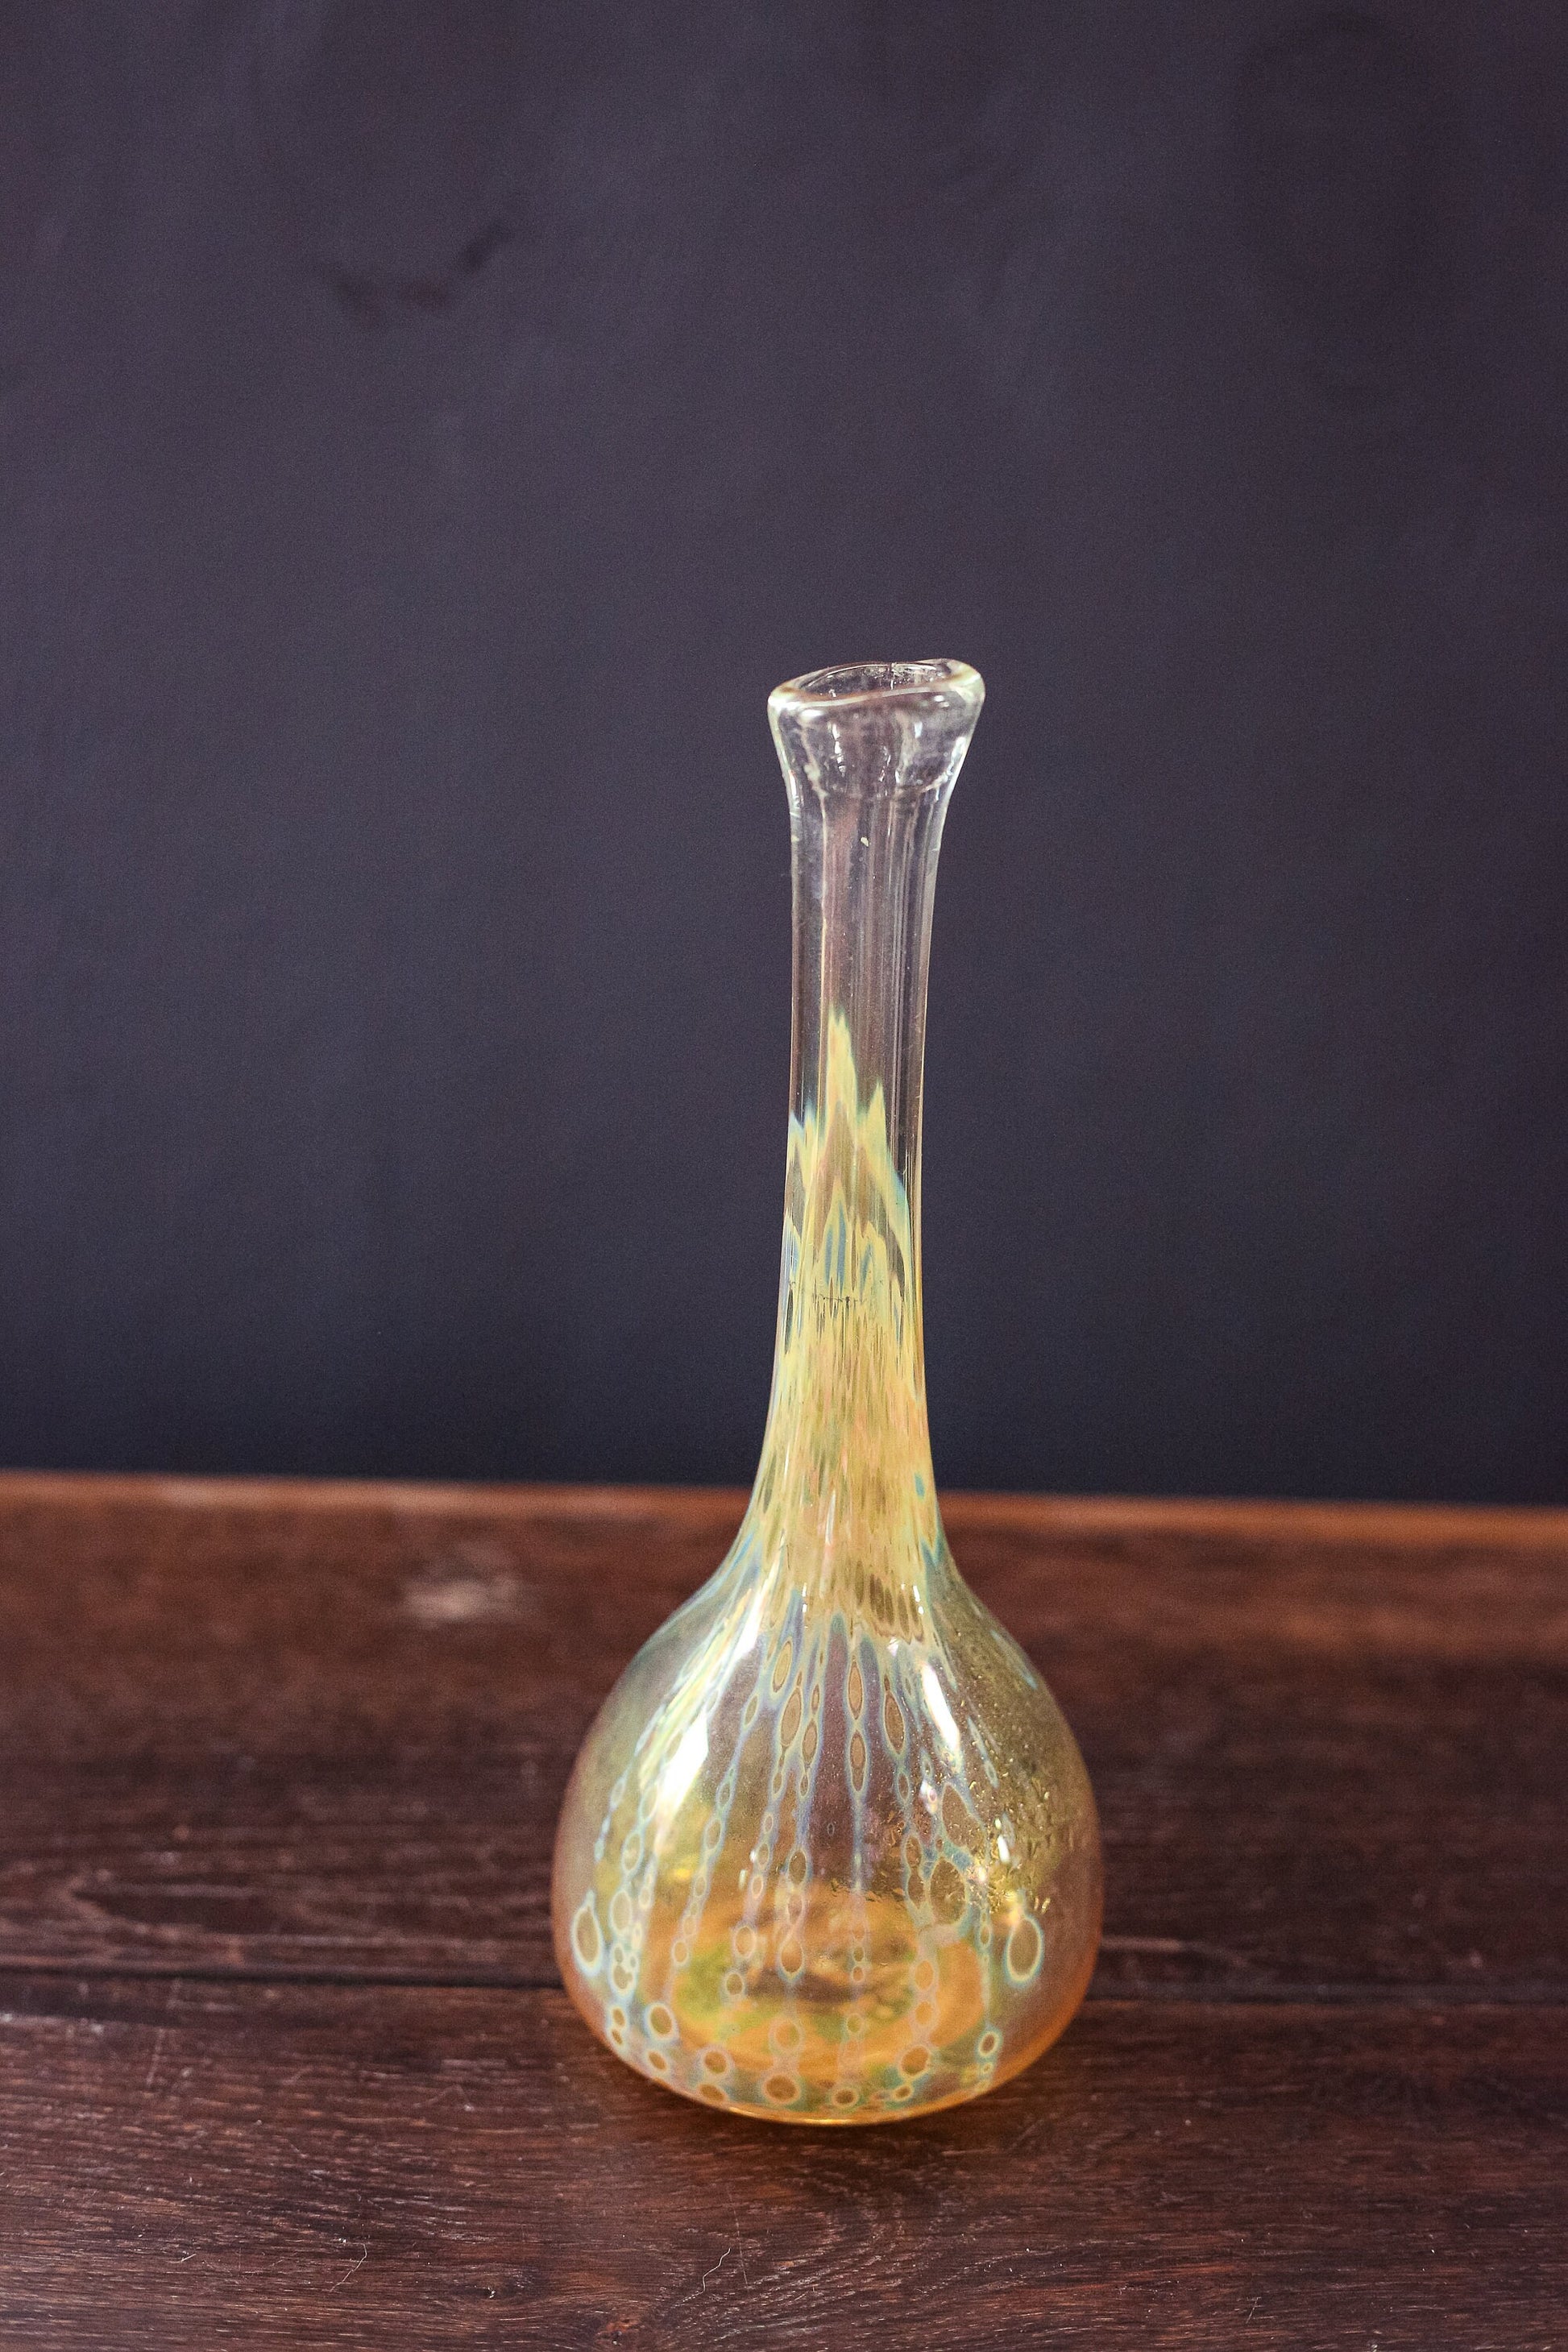 Yellow and Clear Studio Glass Vase with Iridescent Finish - Vintage Hand Blow Glass Bud Vase